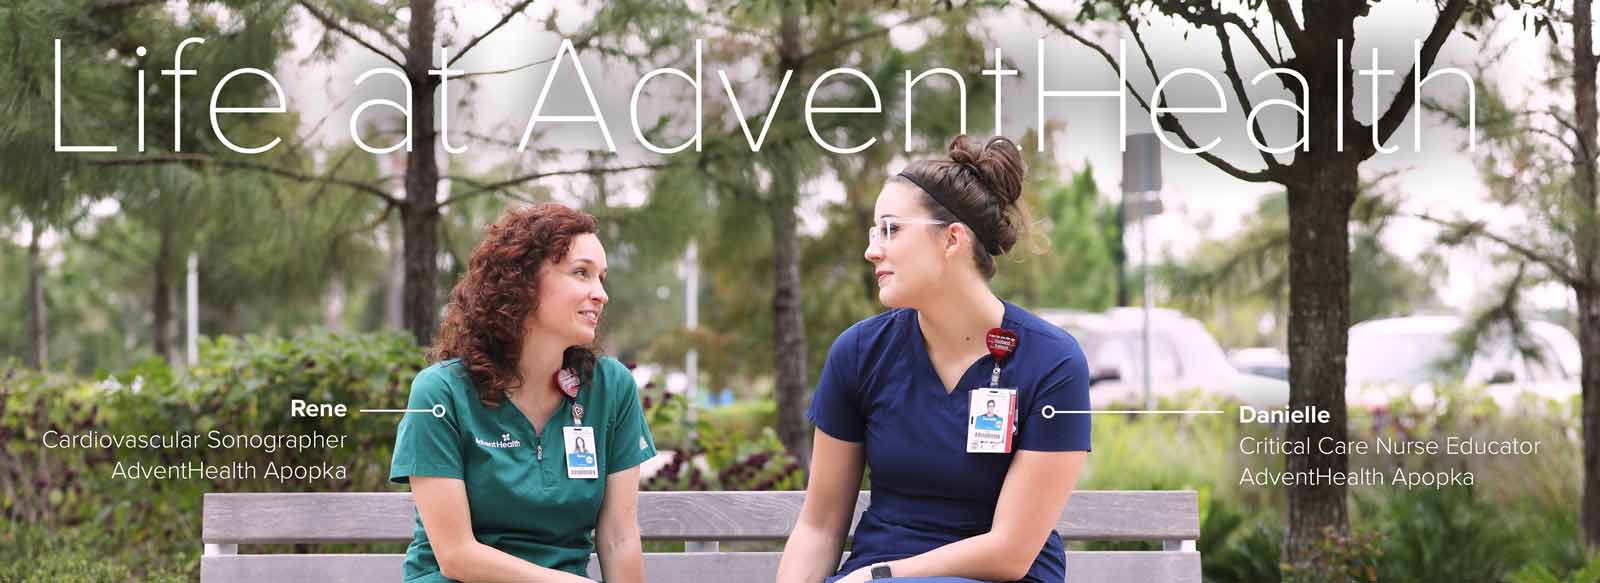 Life-at-AdventHealth-Banner-2